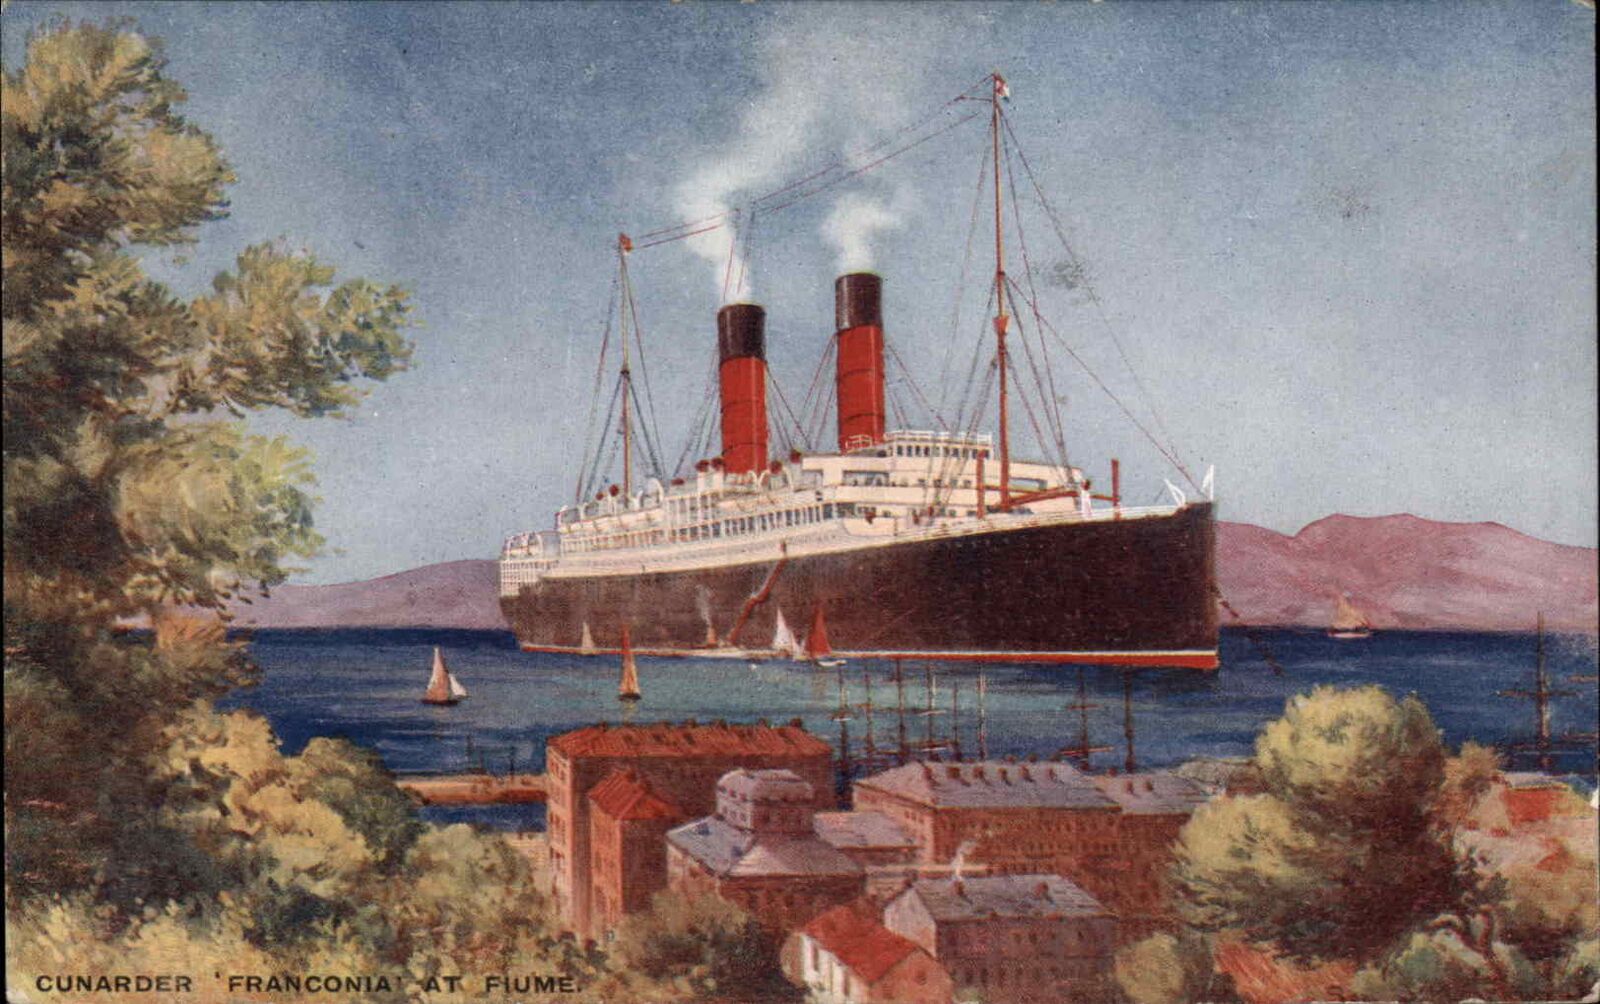 Fiume Italy Cunarder Franconia Steamer Ship c1910 Vintage Postcard